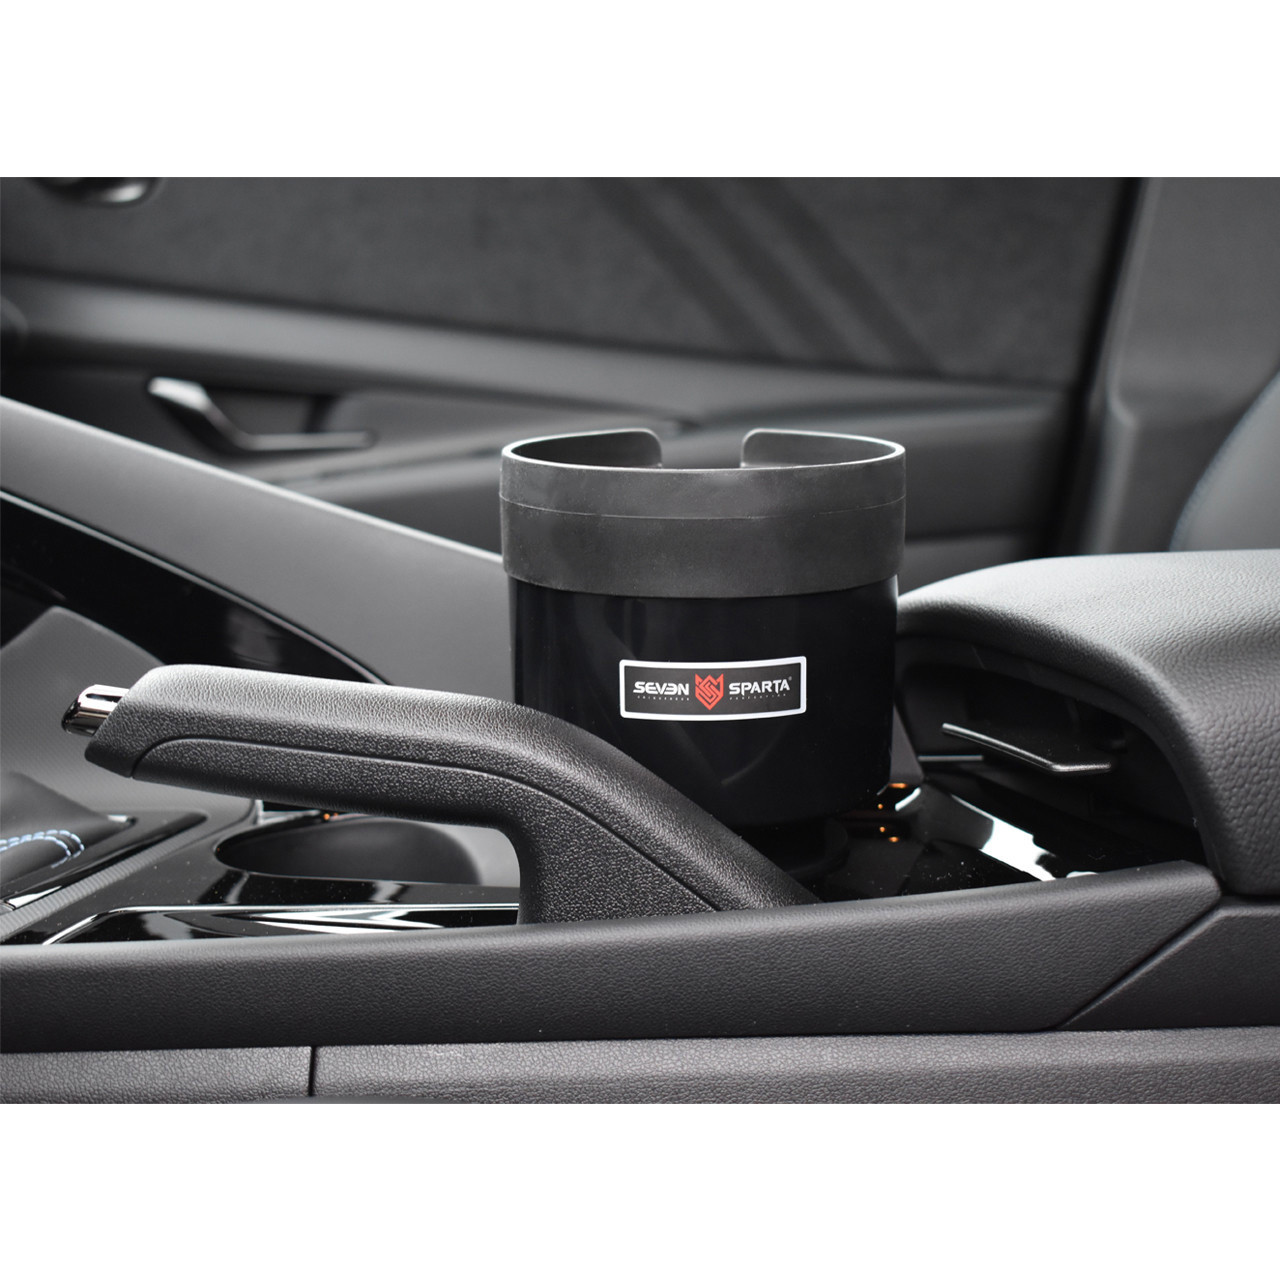 seven sparta universal car cup holder expander organizer with